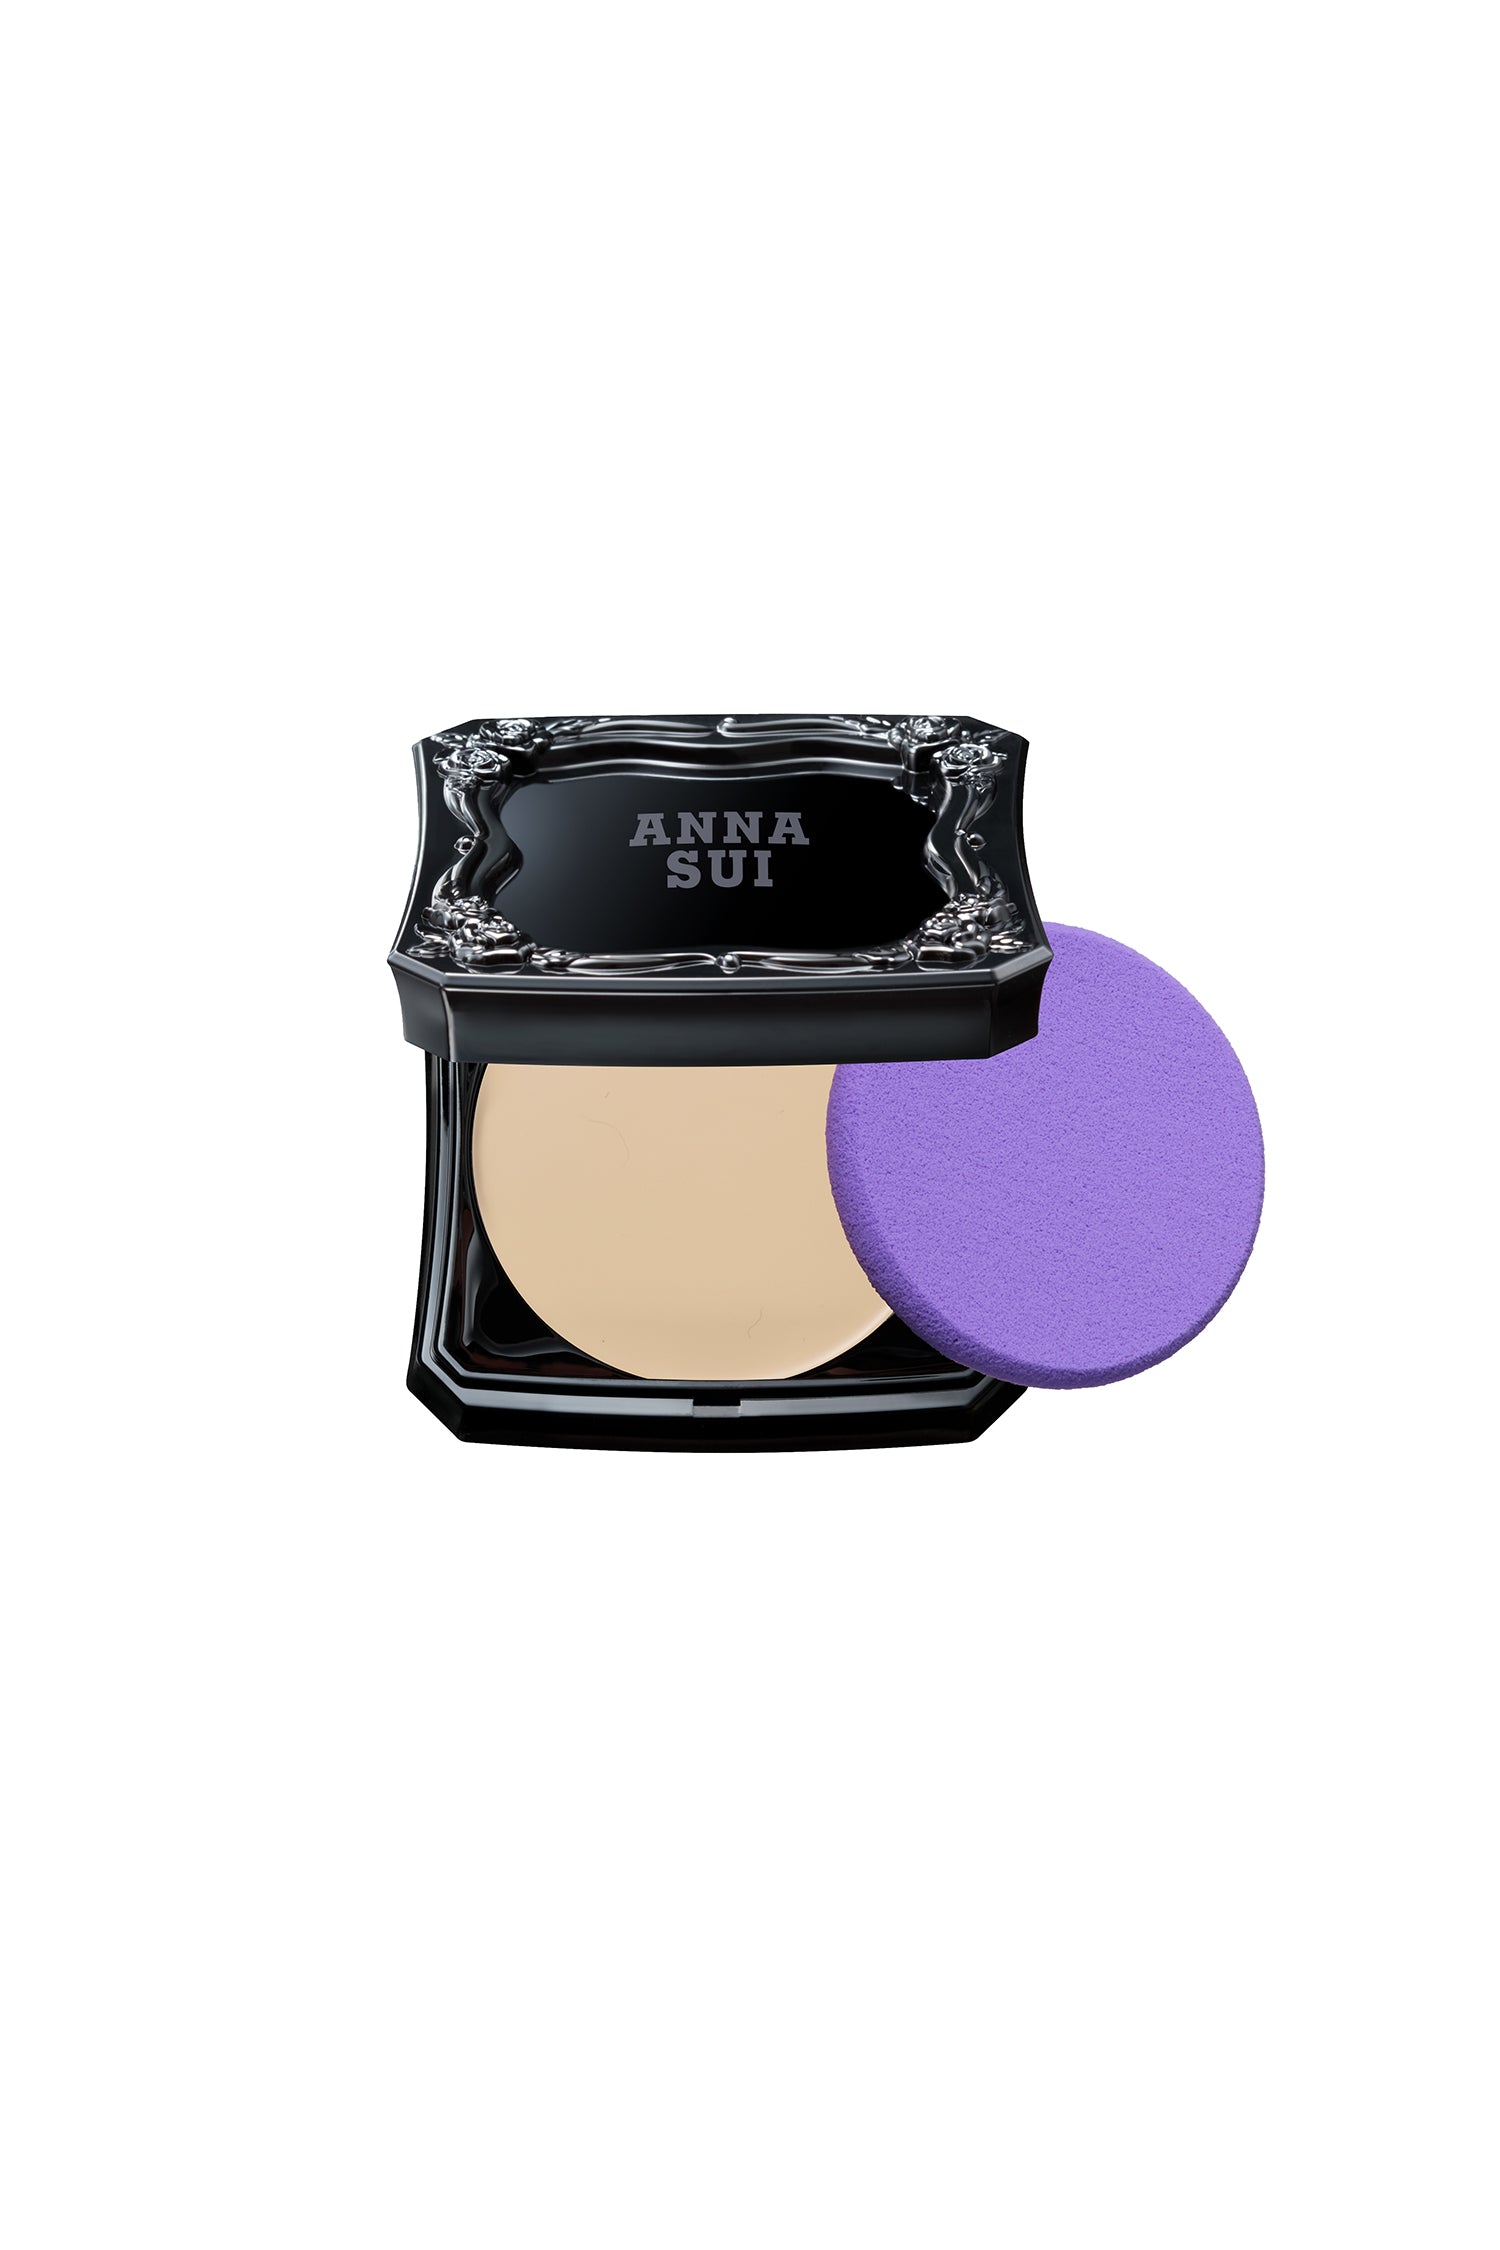 New: Compact Anna Sui